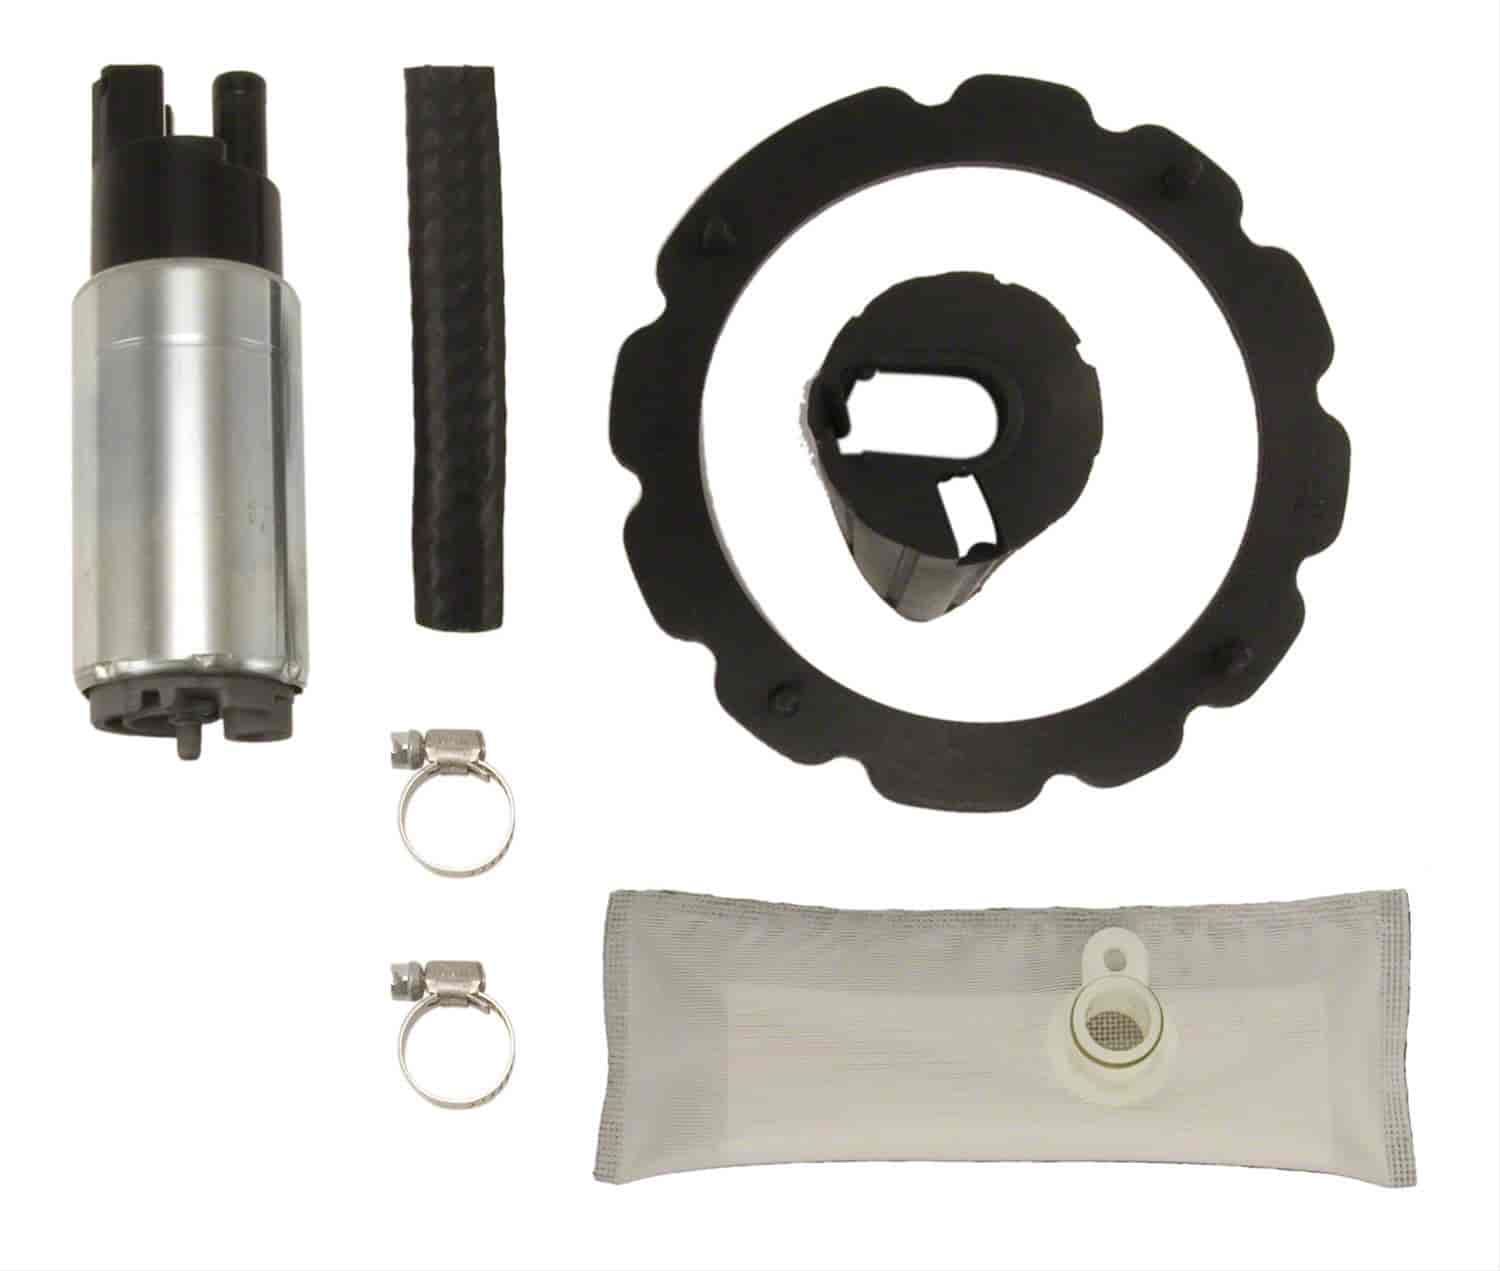 EFI In-Tank Electric Fuel Pump And Strainer Set for 1997-1999 Ford F-150/F-250